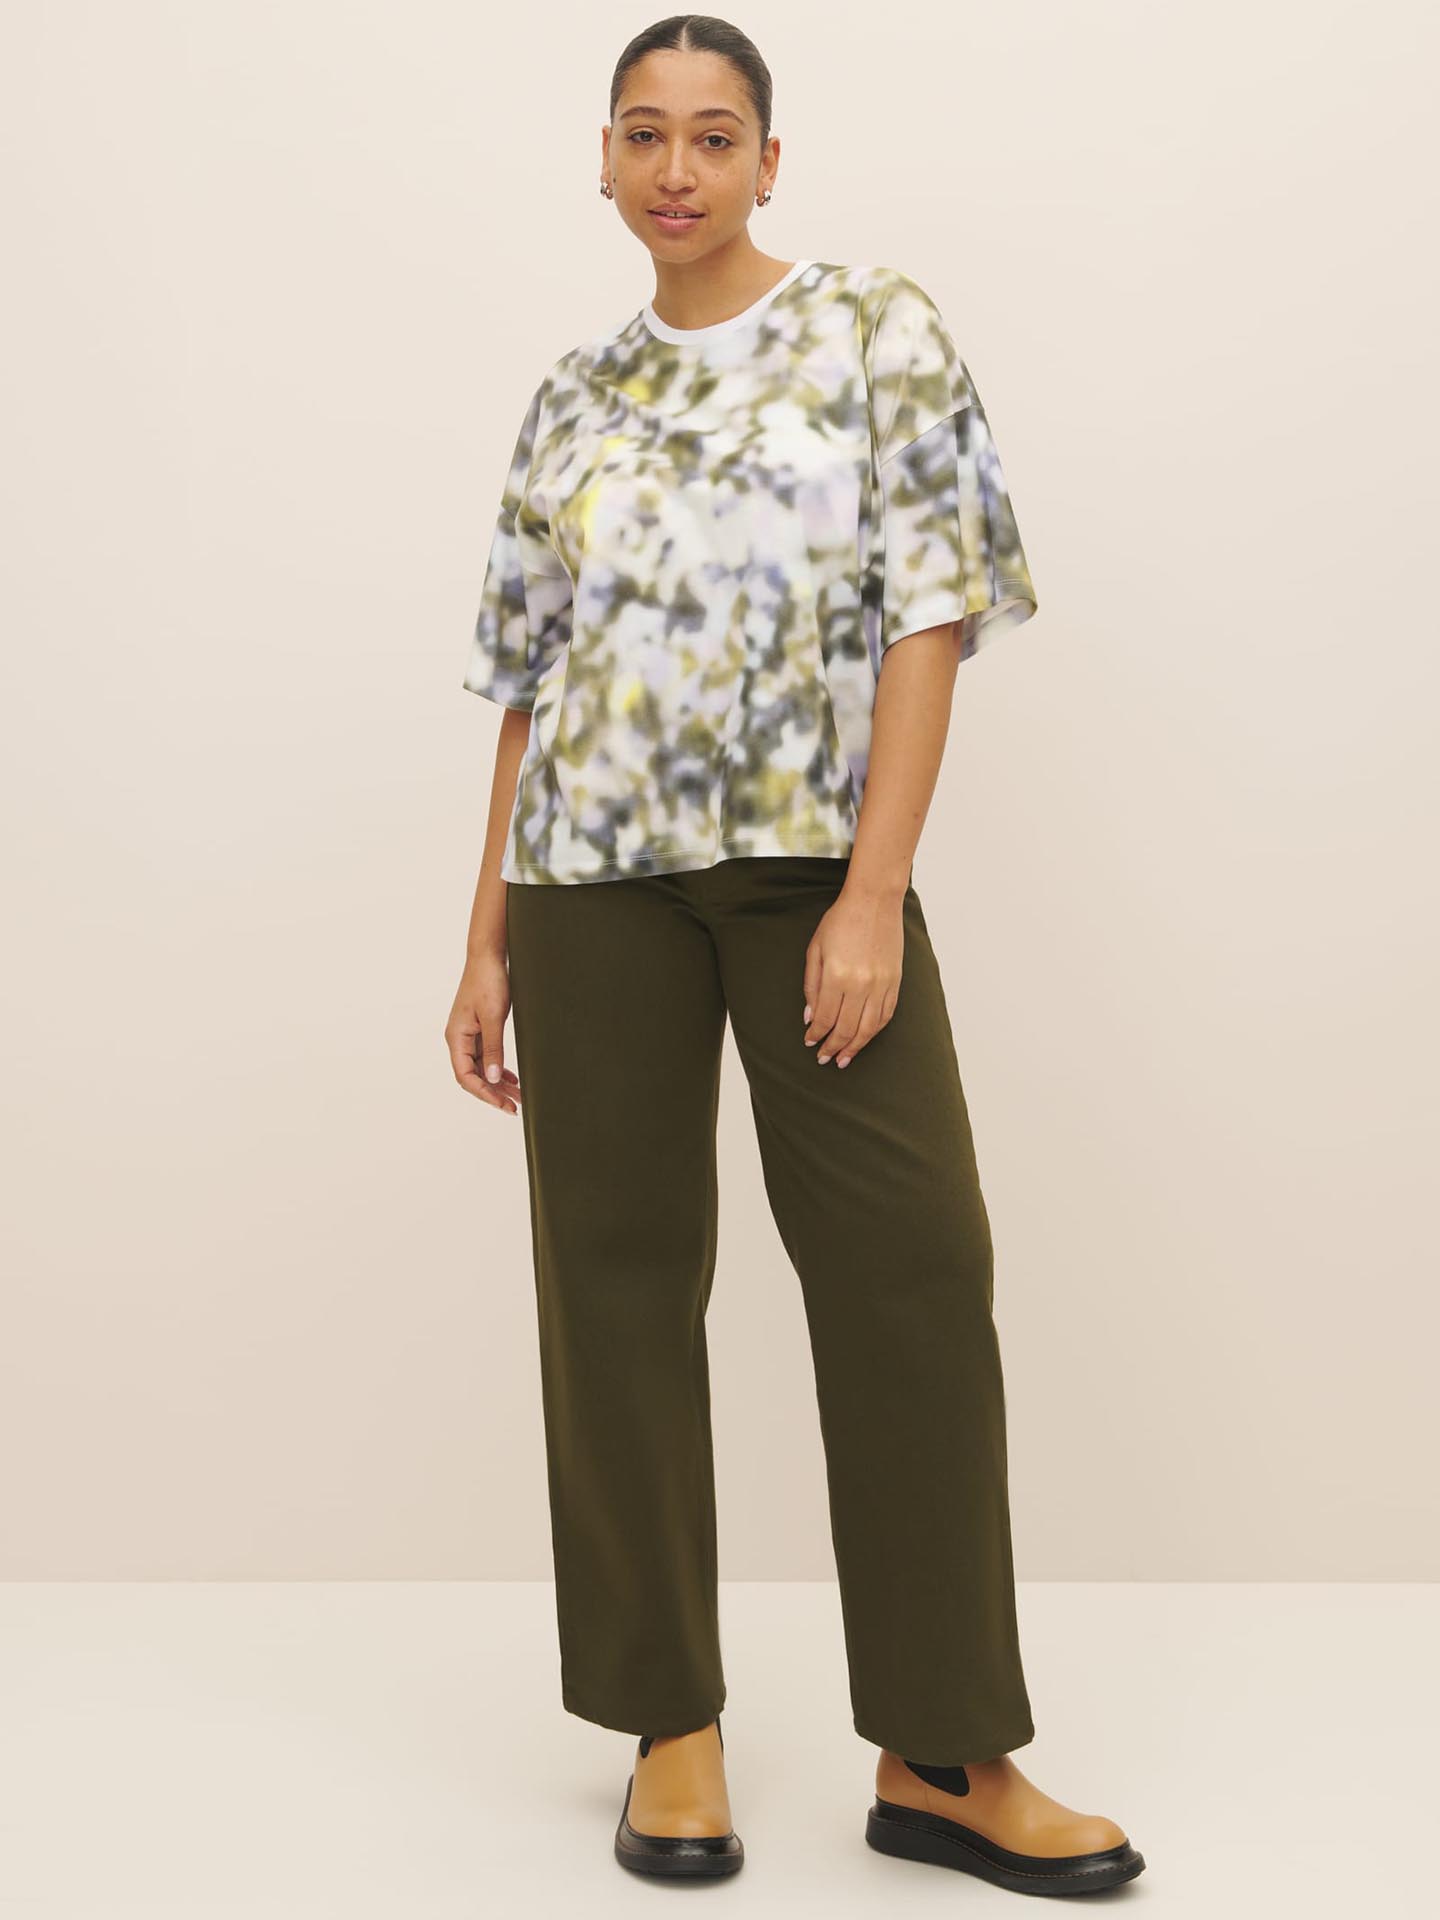 An environmentally conscious woman wearing a Kowtow Komorebi Print Tee made from Fairtrade organic cotton paired with comfortable olive wide leg pants.